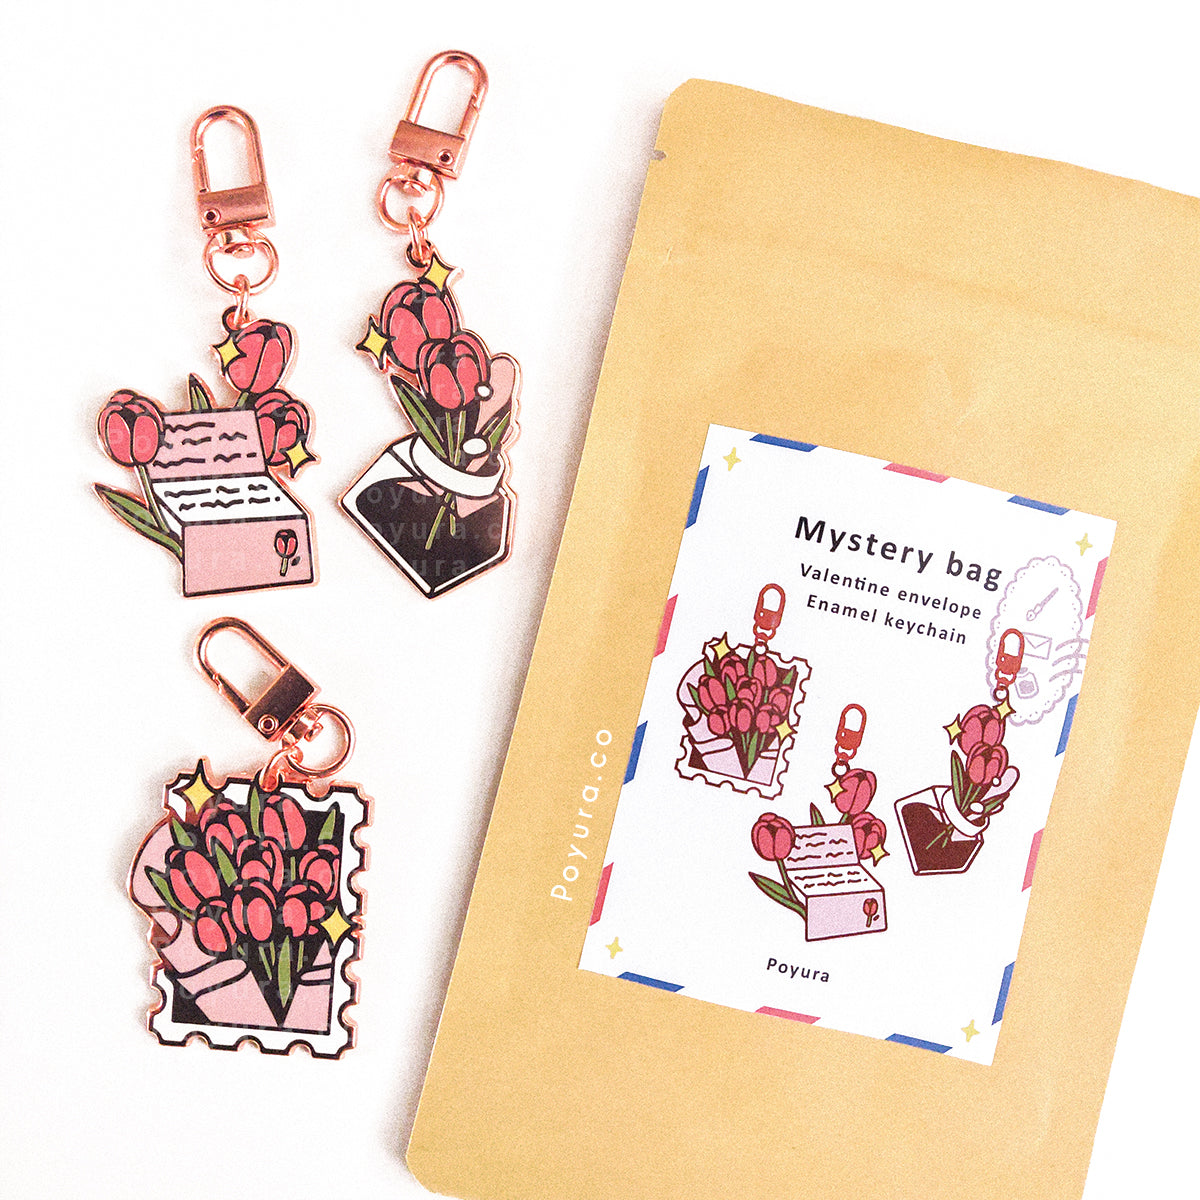 Keychain gacha mystery bag blind bag lucky bag tulip flower bouquet letter penpal pen writing mail ink bottle stamp post valentine's day love heart enamel keychain cute spring pink purple flower floral retro game metal keycharm charm keyring bag makeup bag canvas tote bag deco accessory